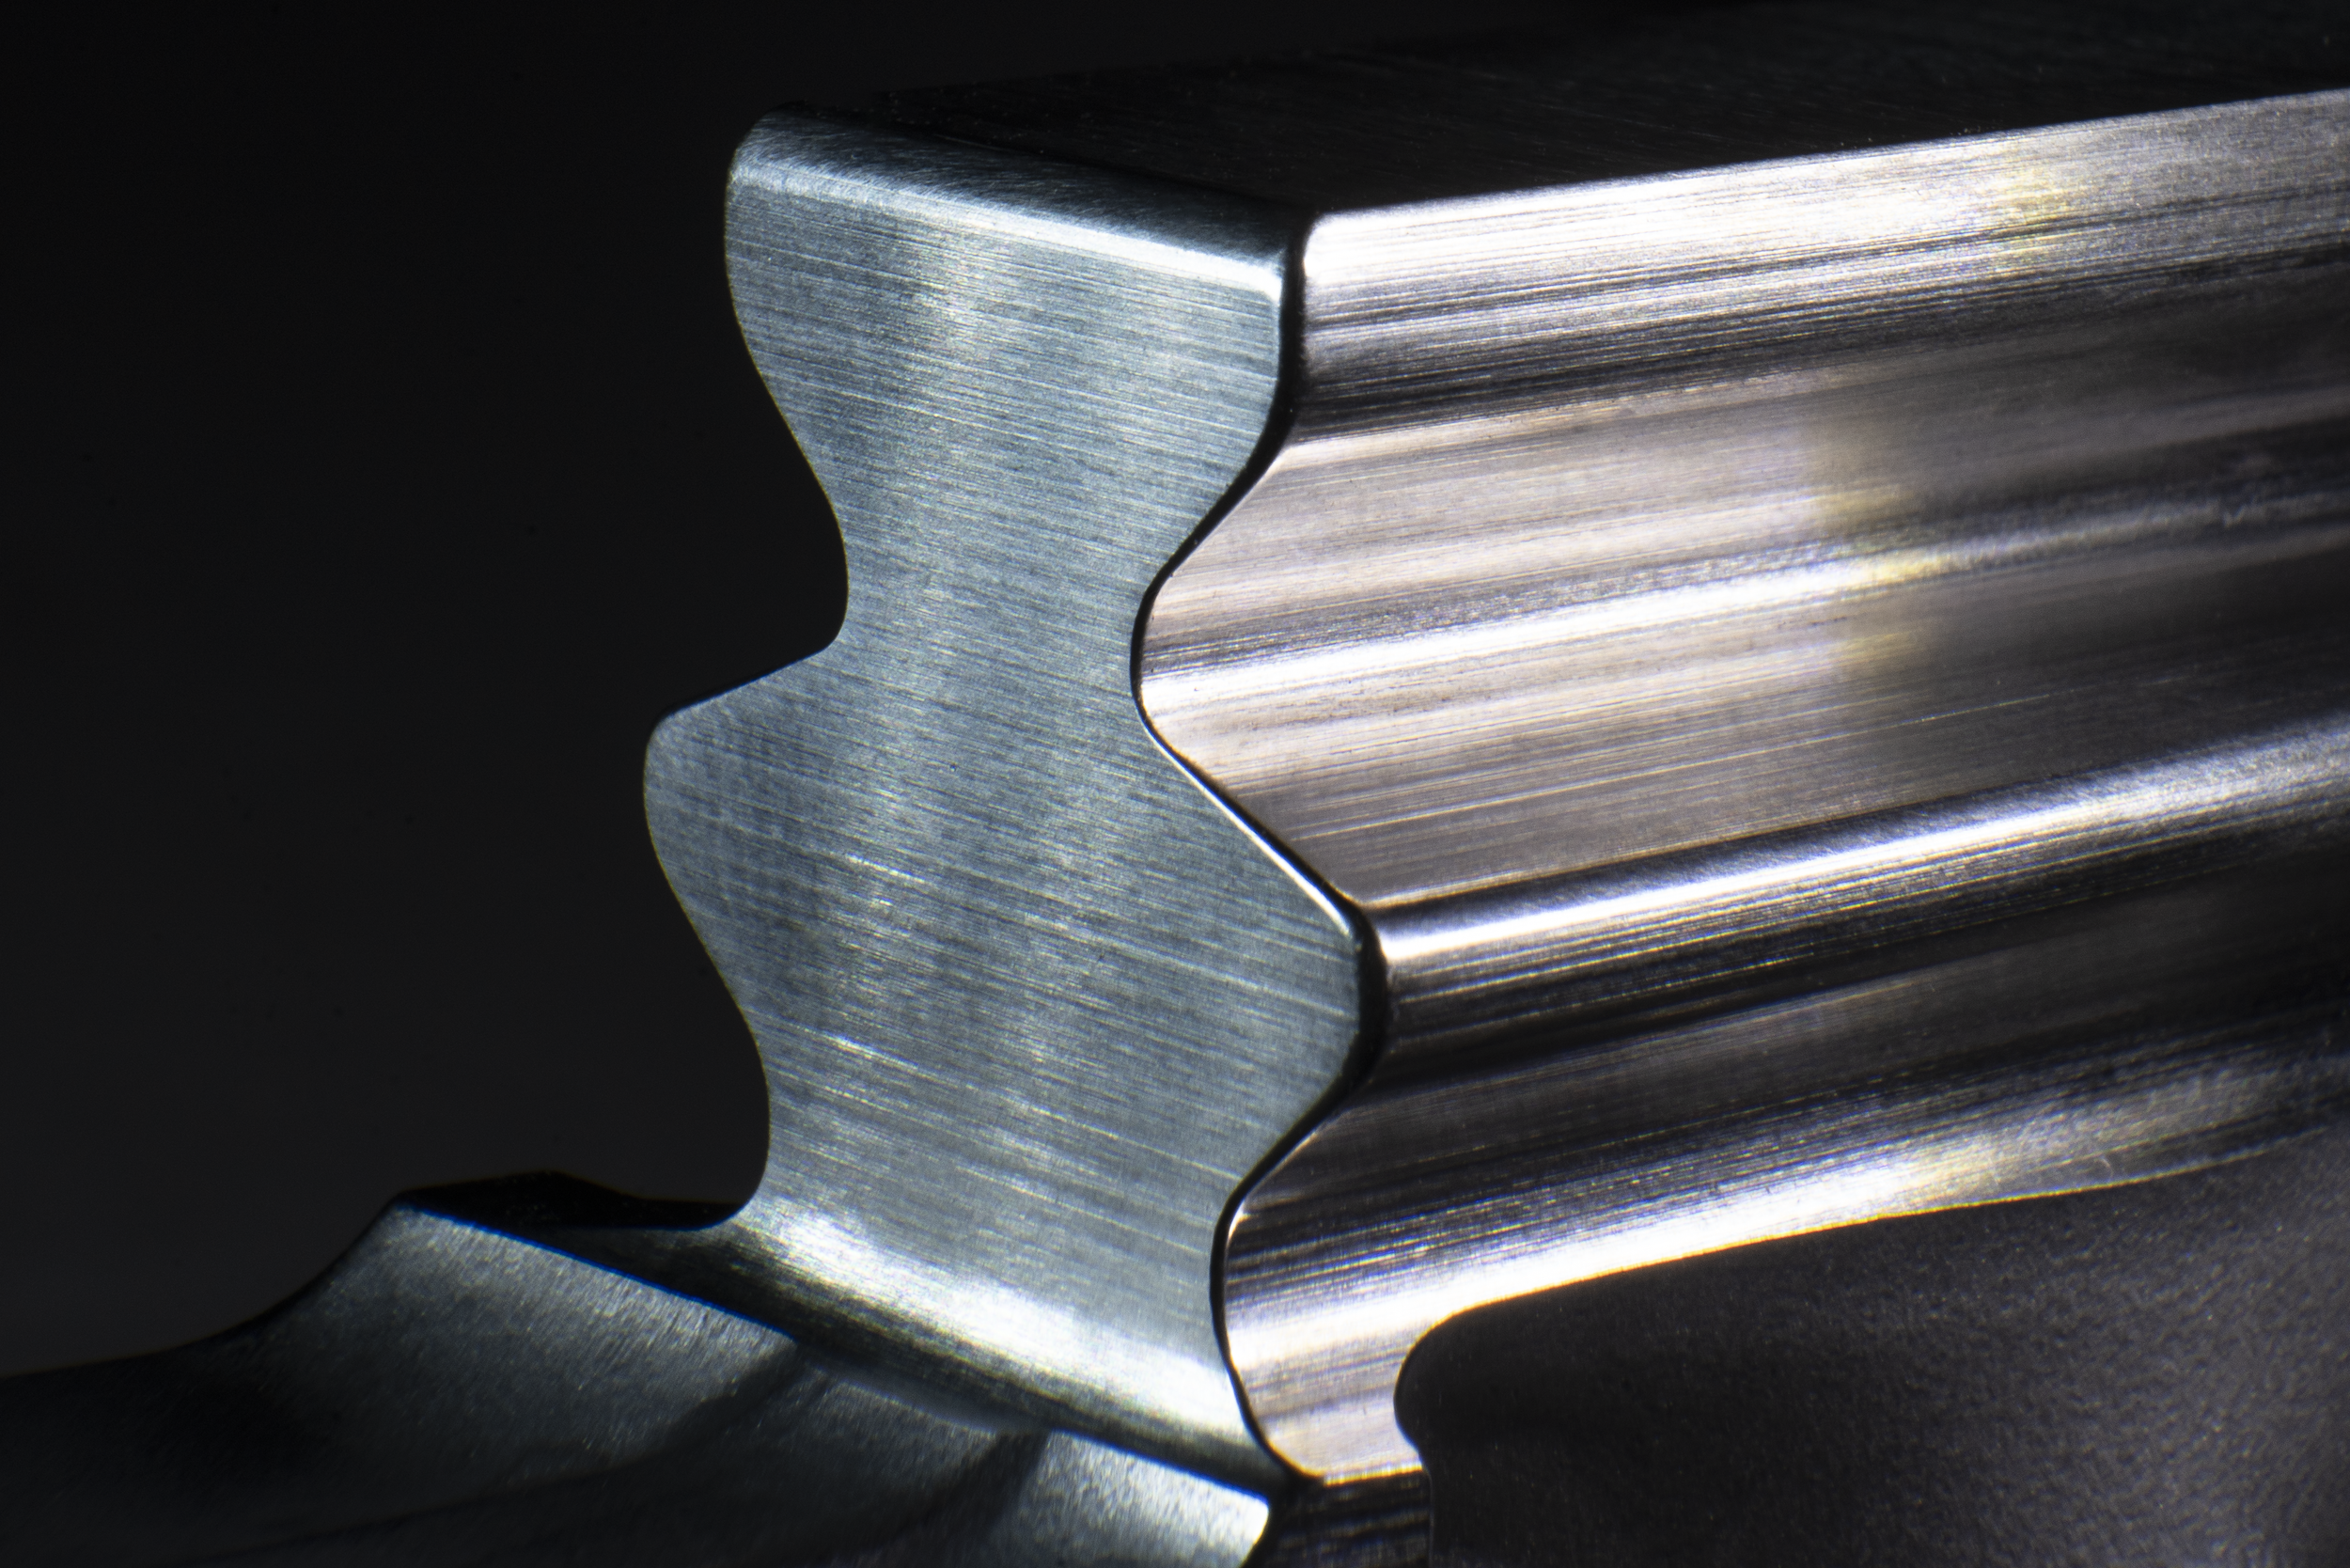  Aerospace-grade chamfer done by the MAX. 